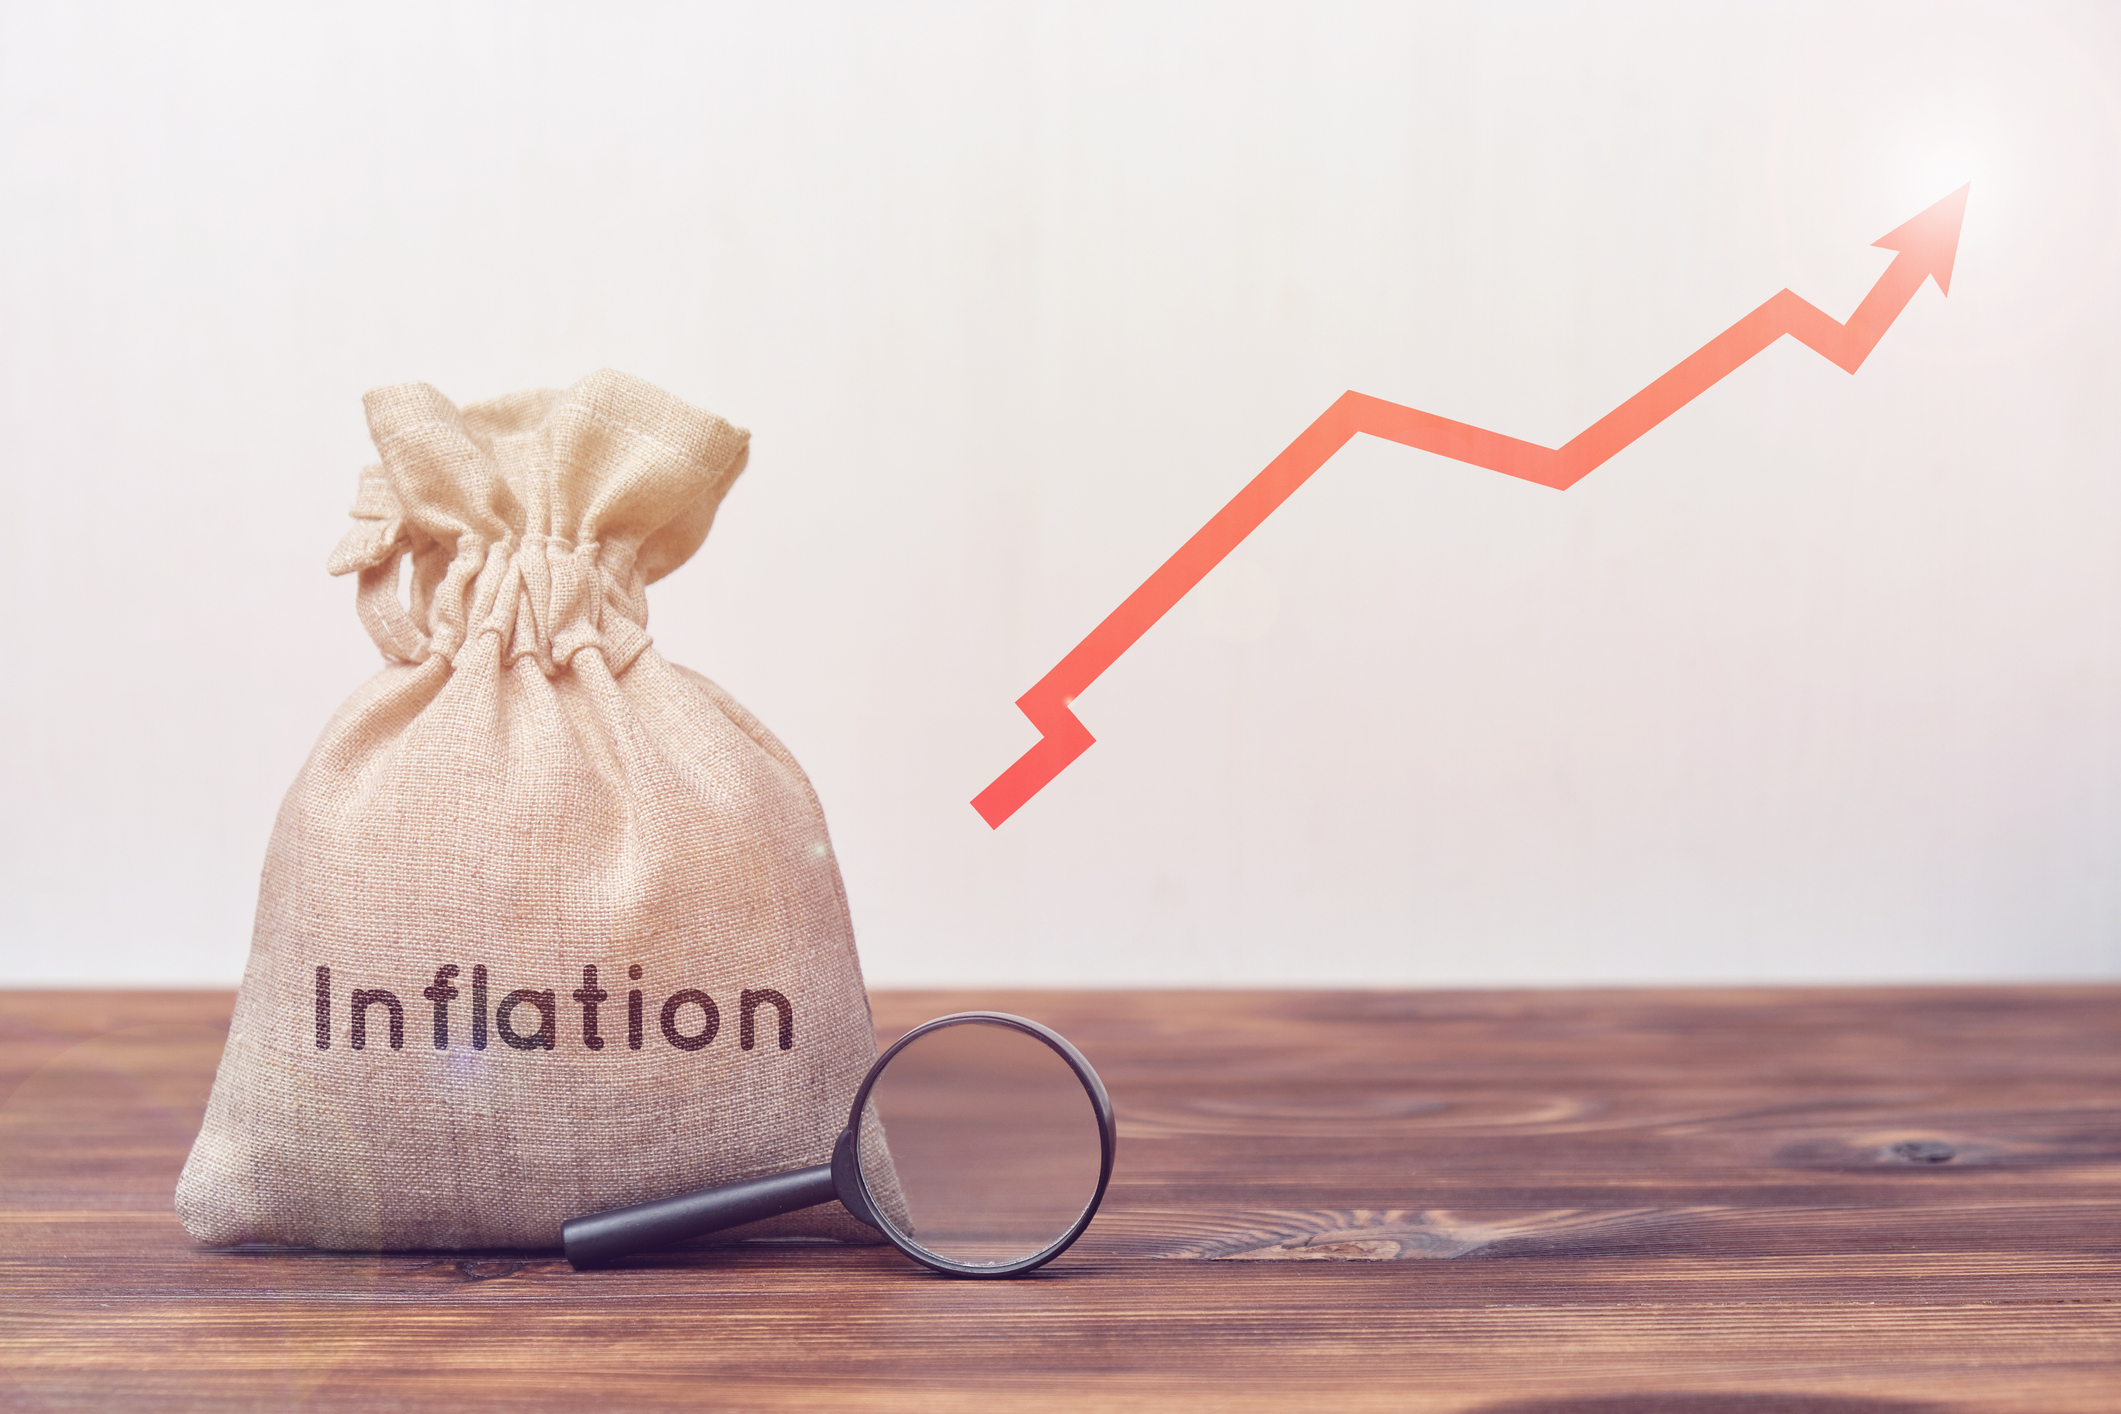 Will We See More Inflation in 2022? Juniper Wealth Management